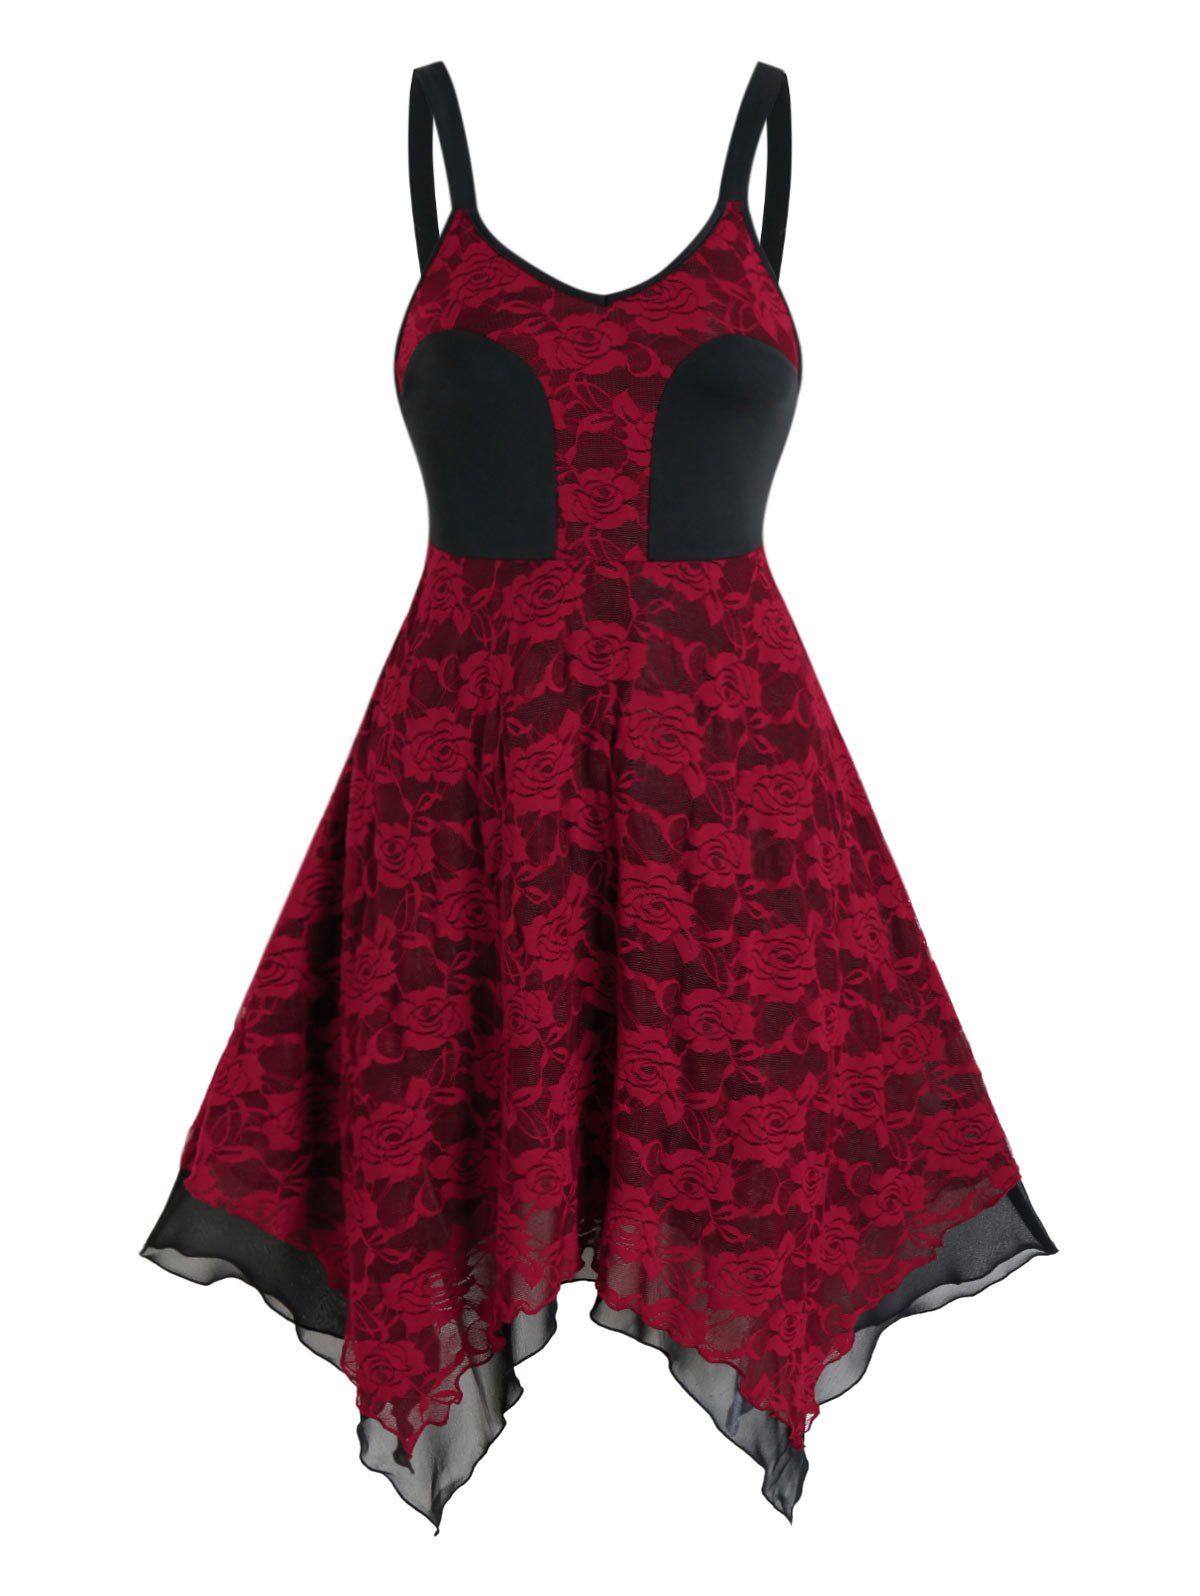 Two Tone Layered Asymmetrical Lace Cami Dress - RED 3XL